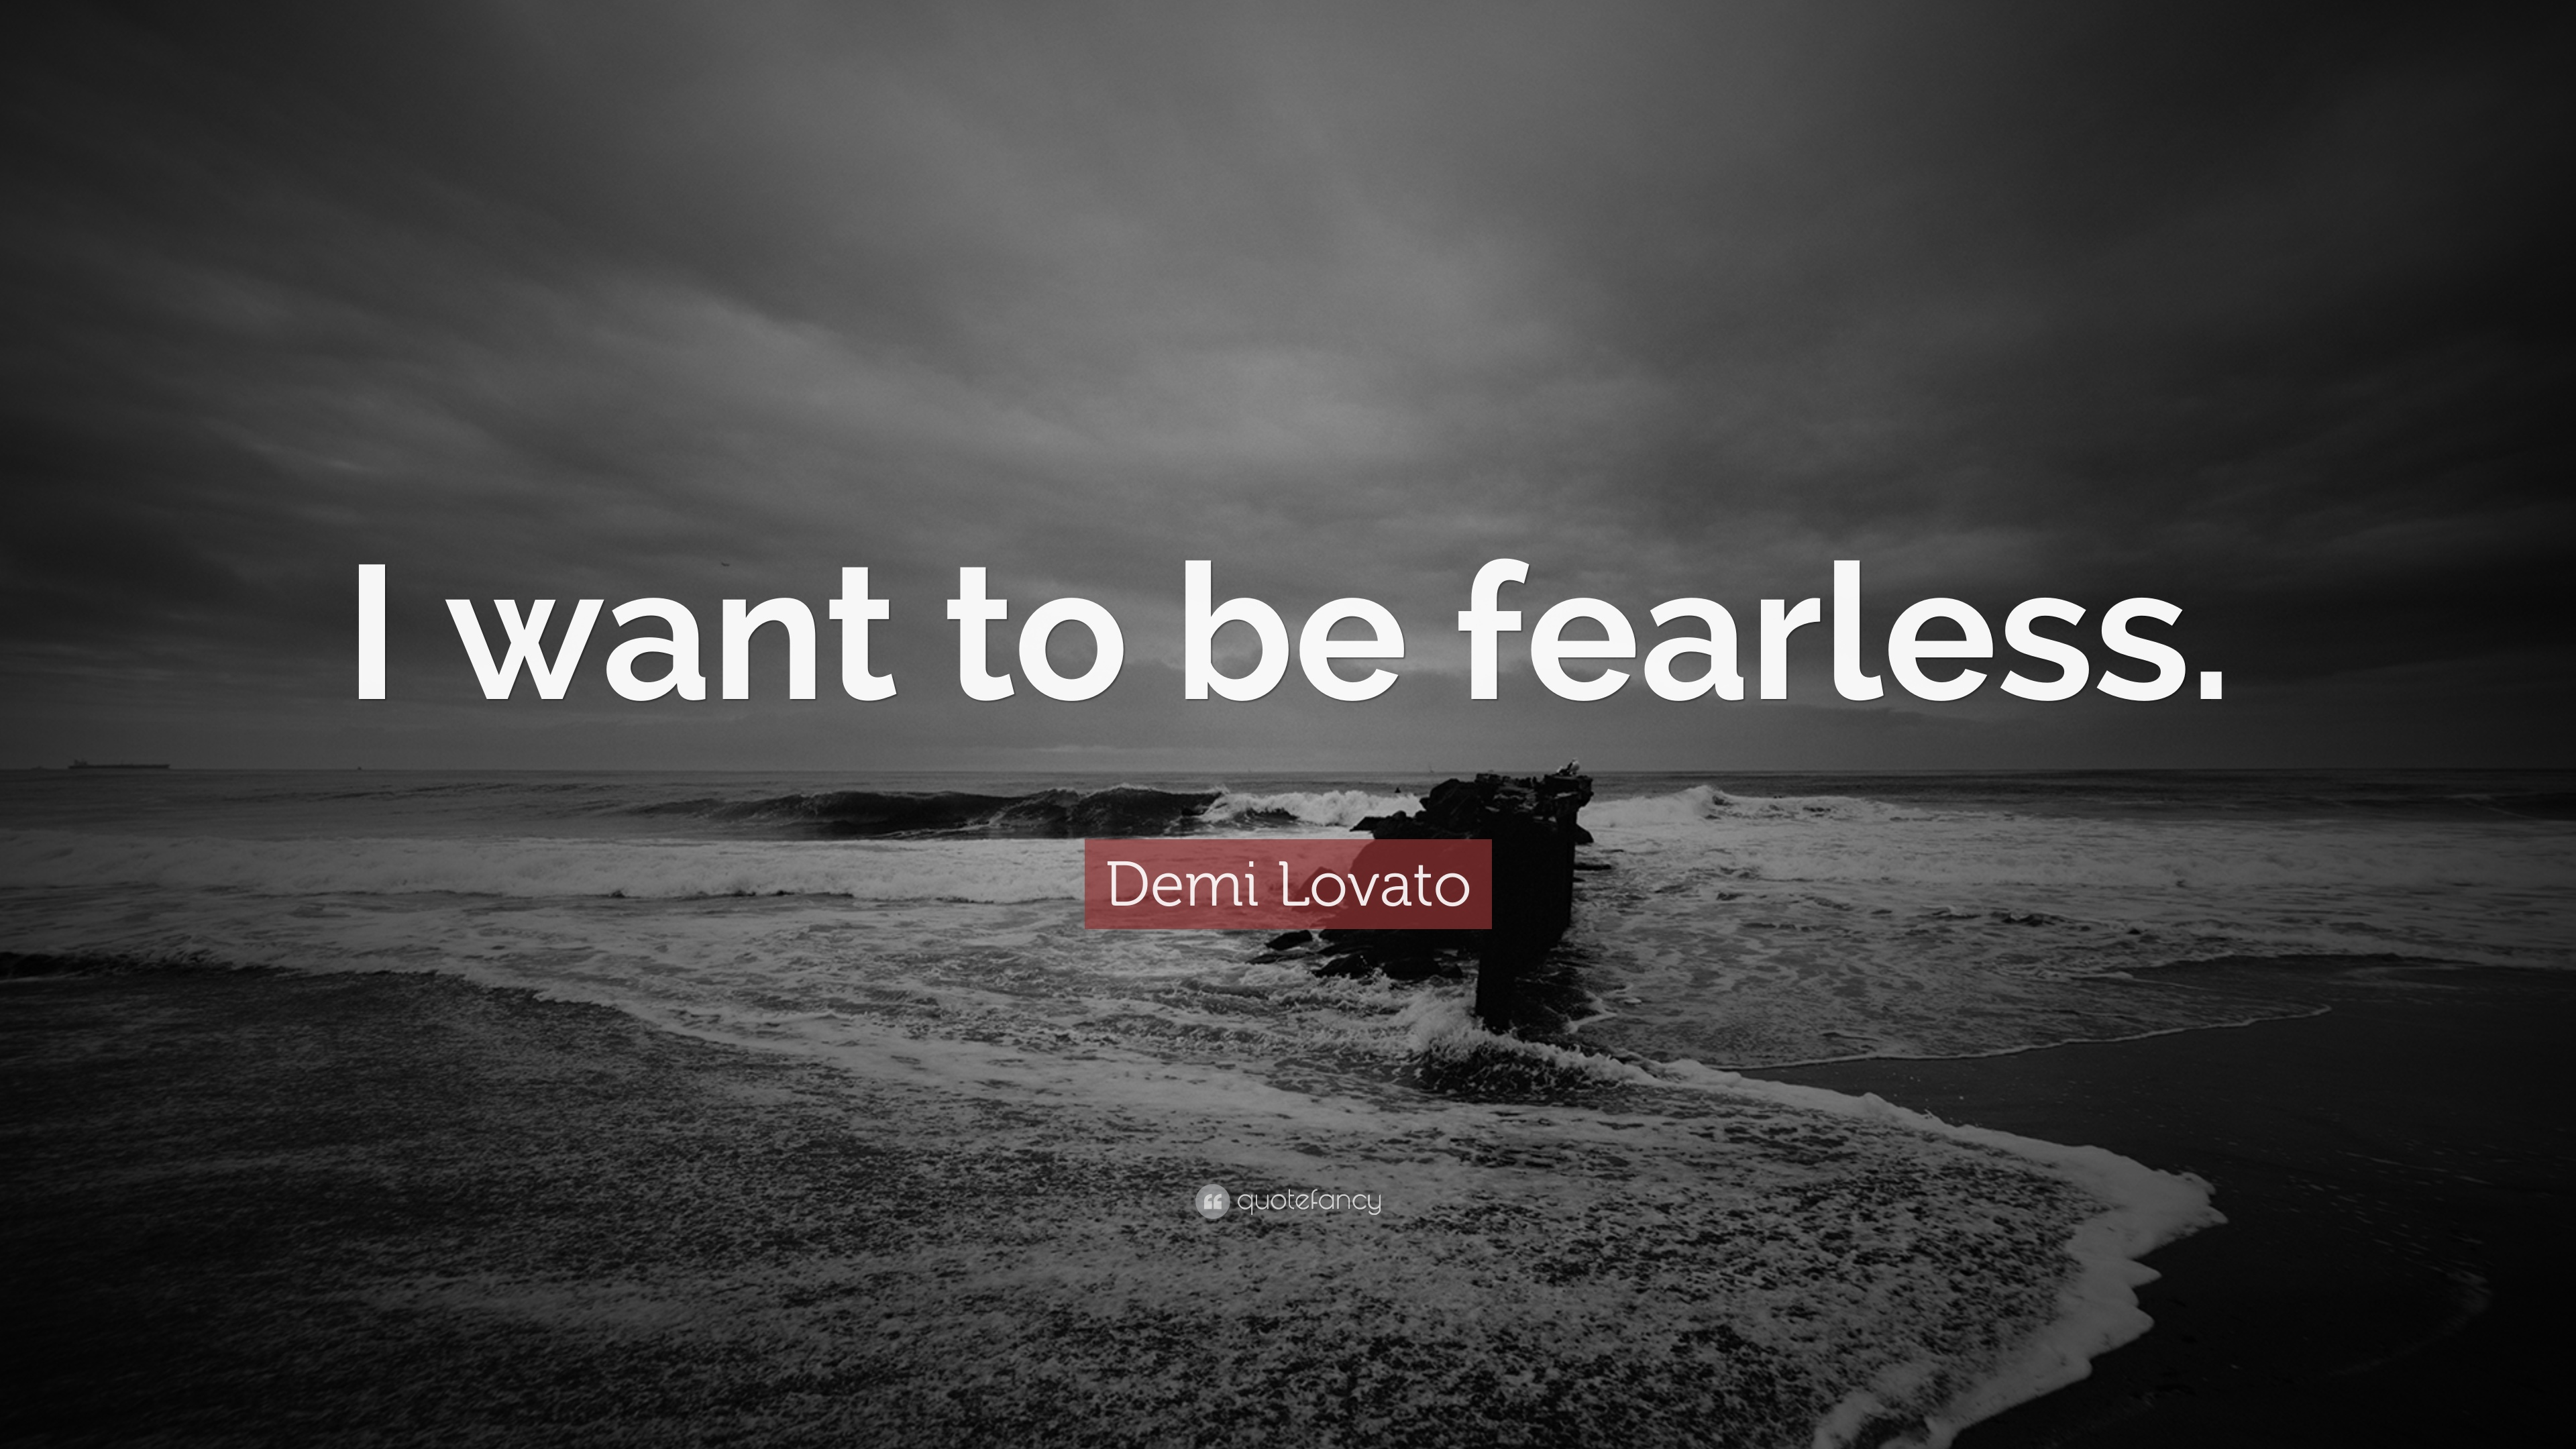 Free: Fearless Wallpaper - Other - Listia.com Auctions for Free Stuff